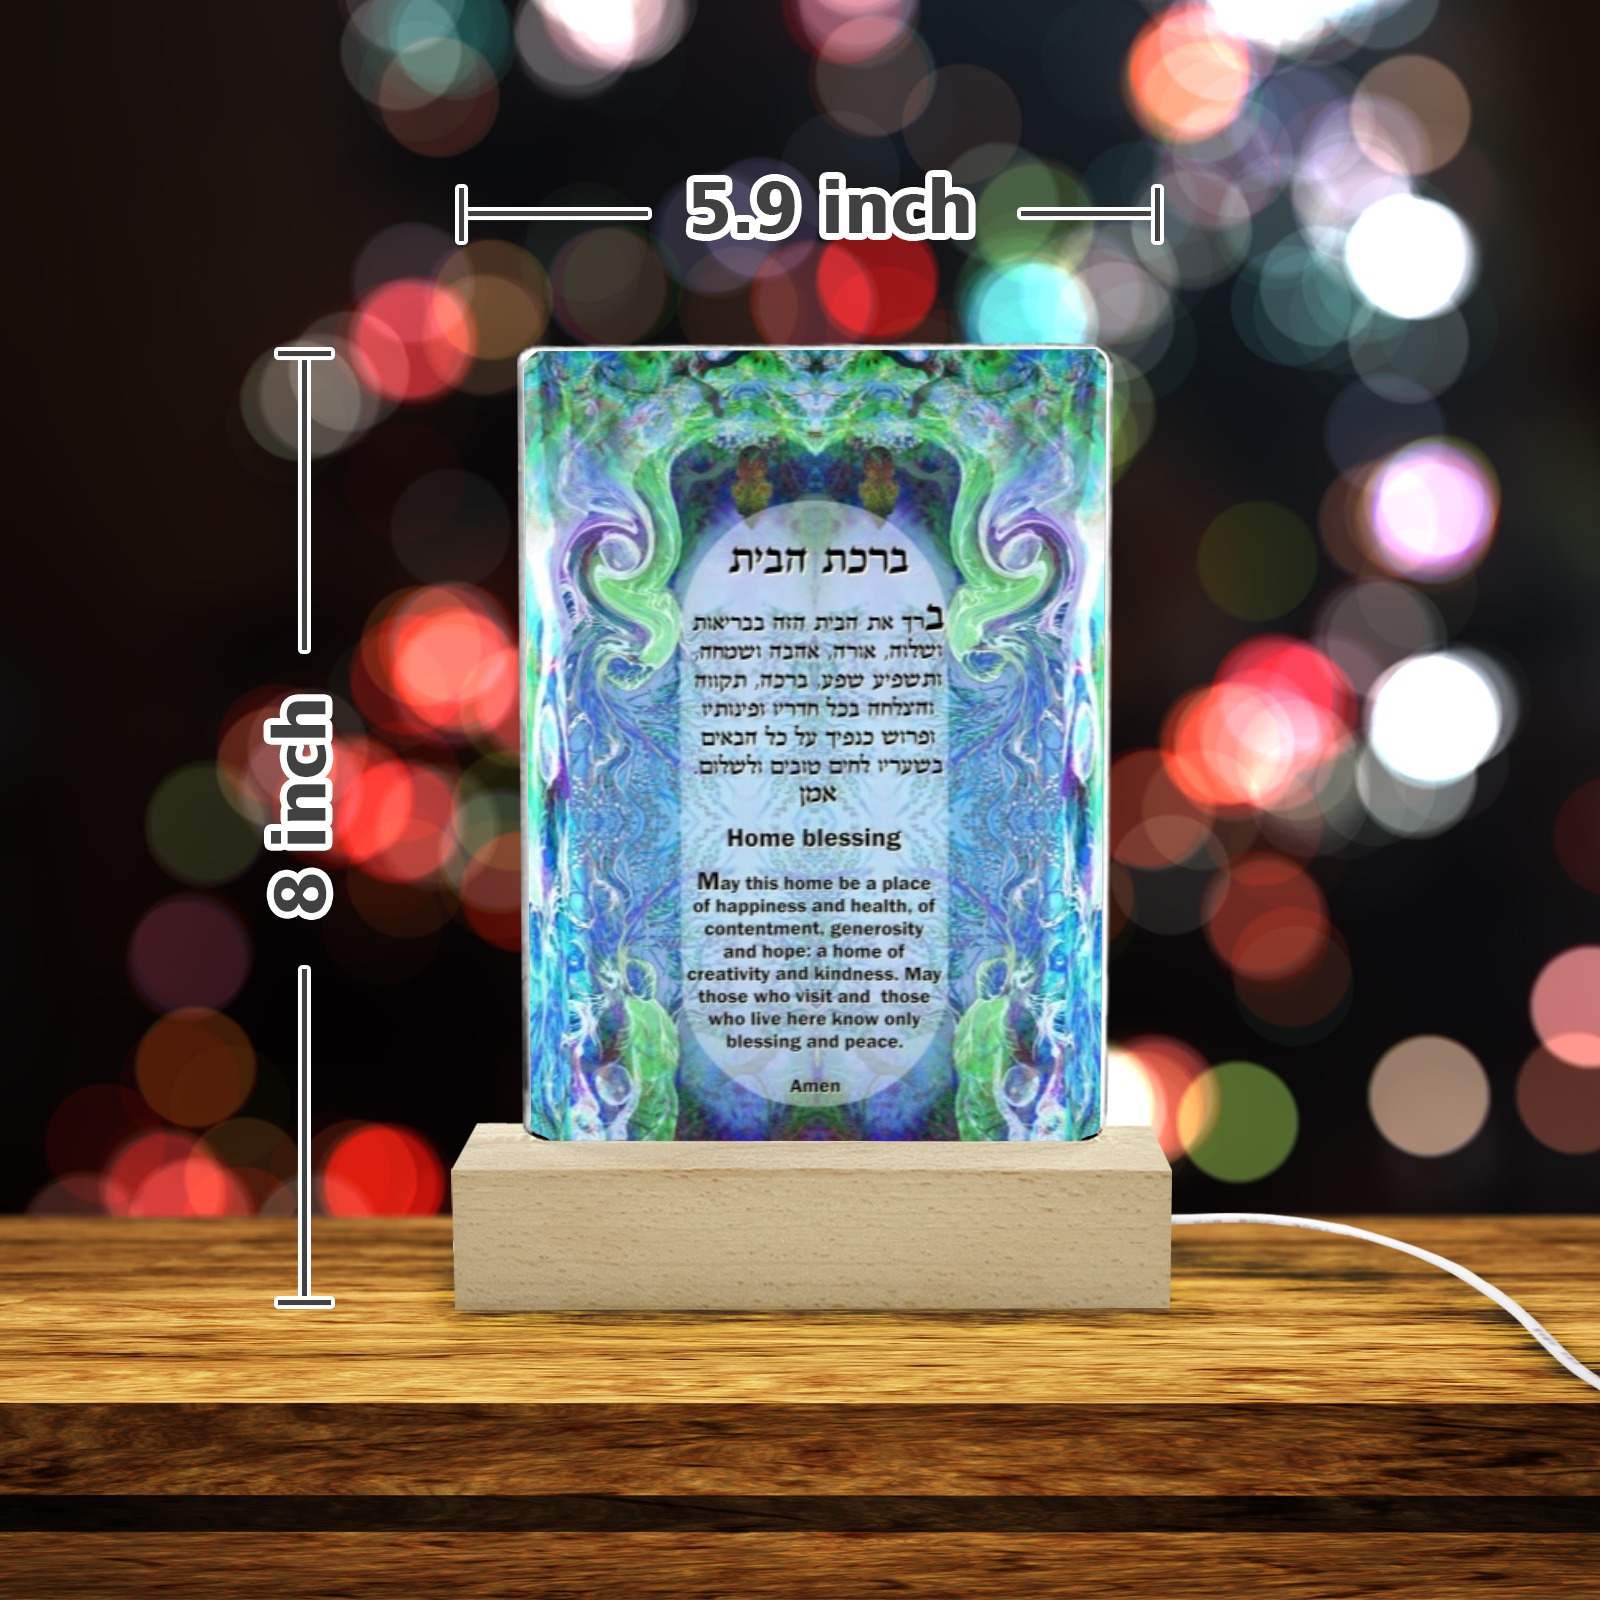 home blessing Hebrew English 17x17-2 Acrylic Photo Print with Colorful Light Square Base 5"x7.5"